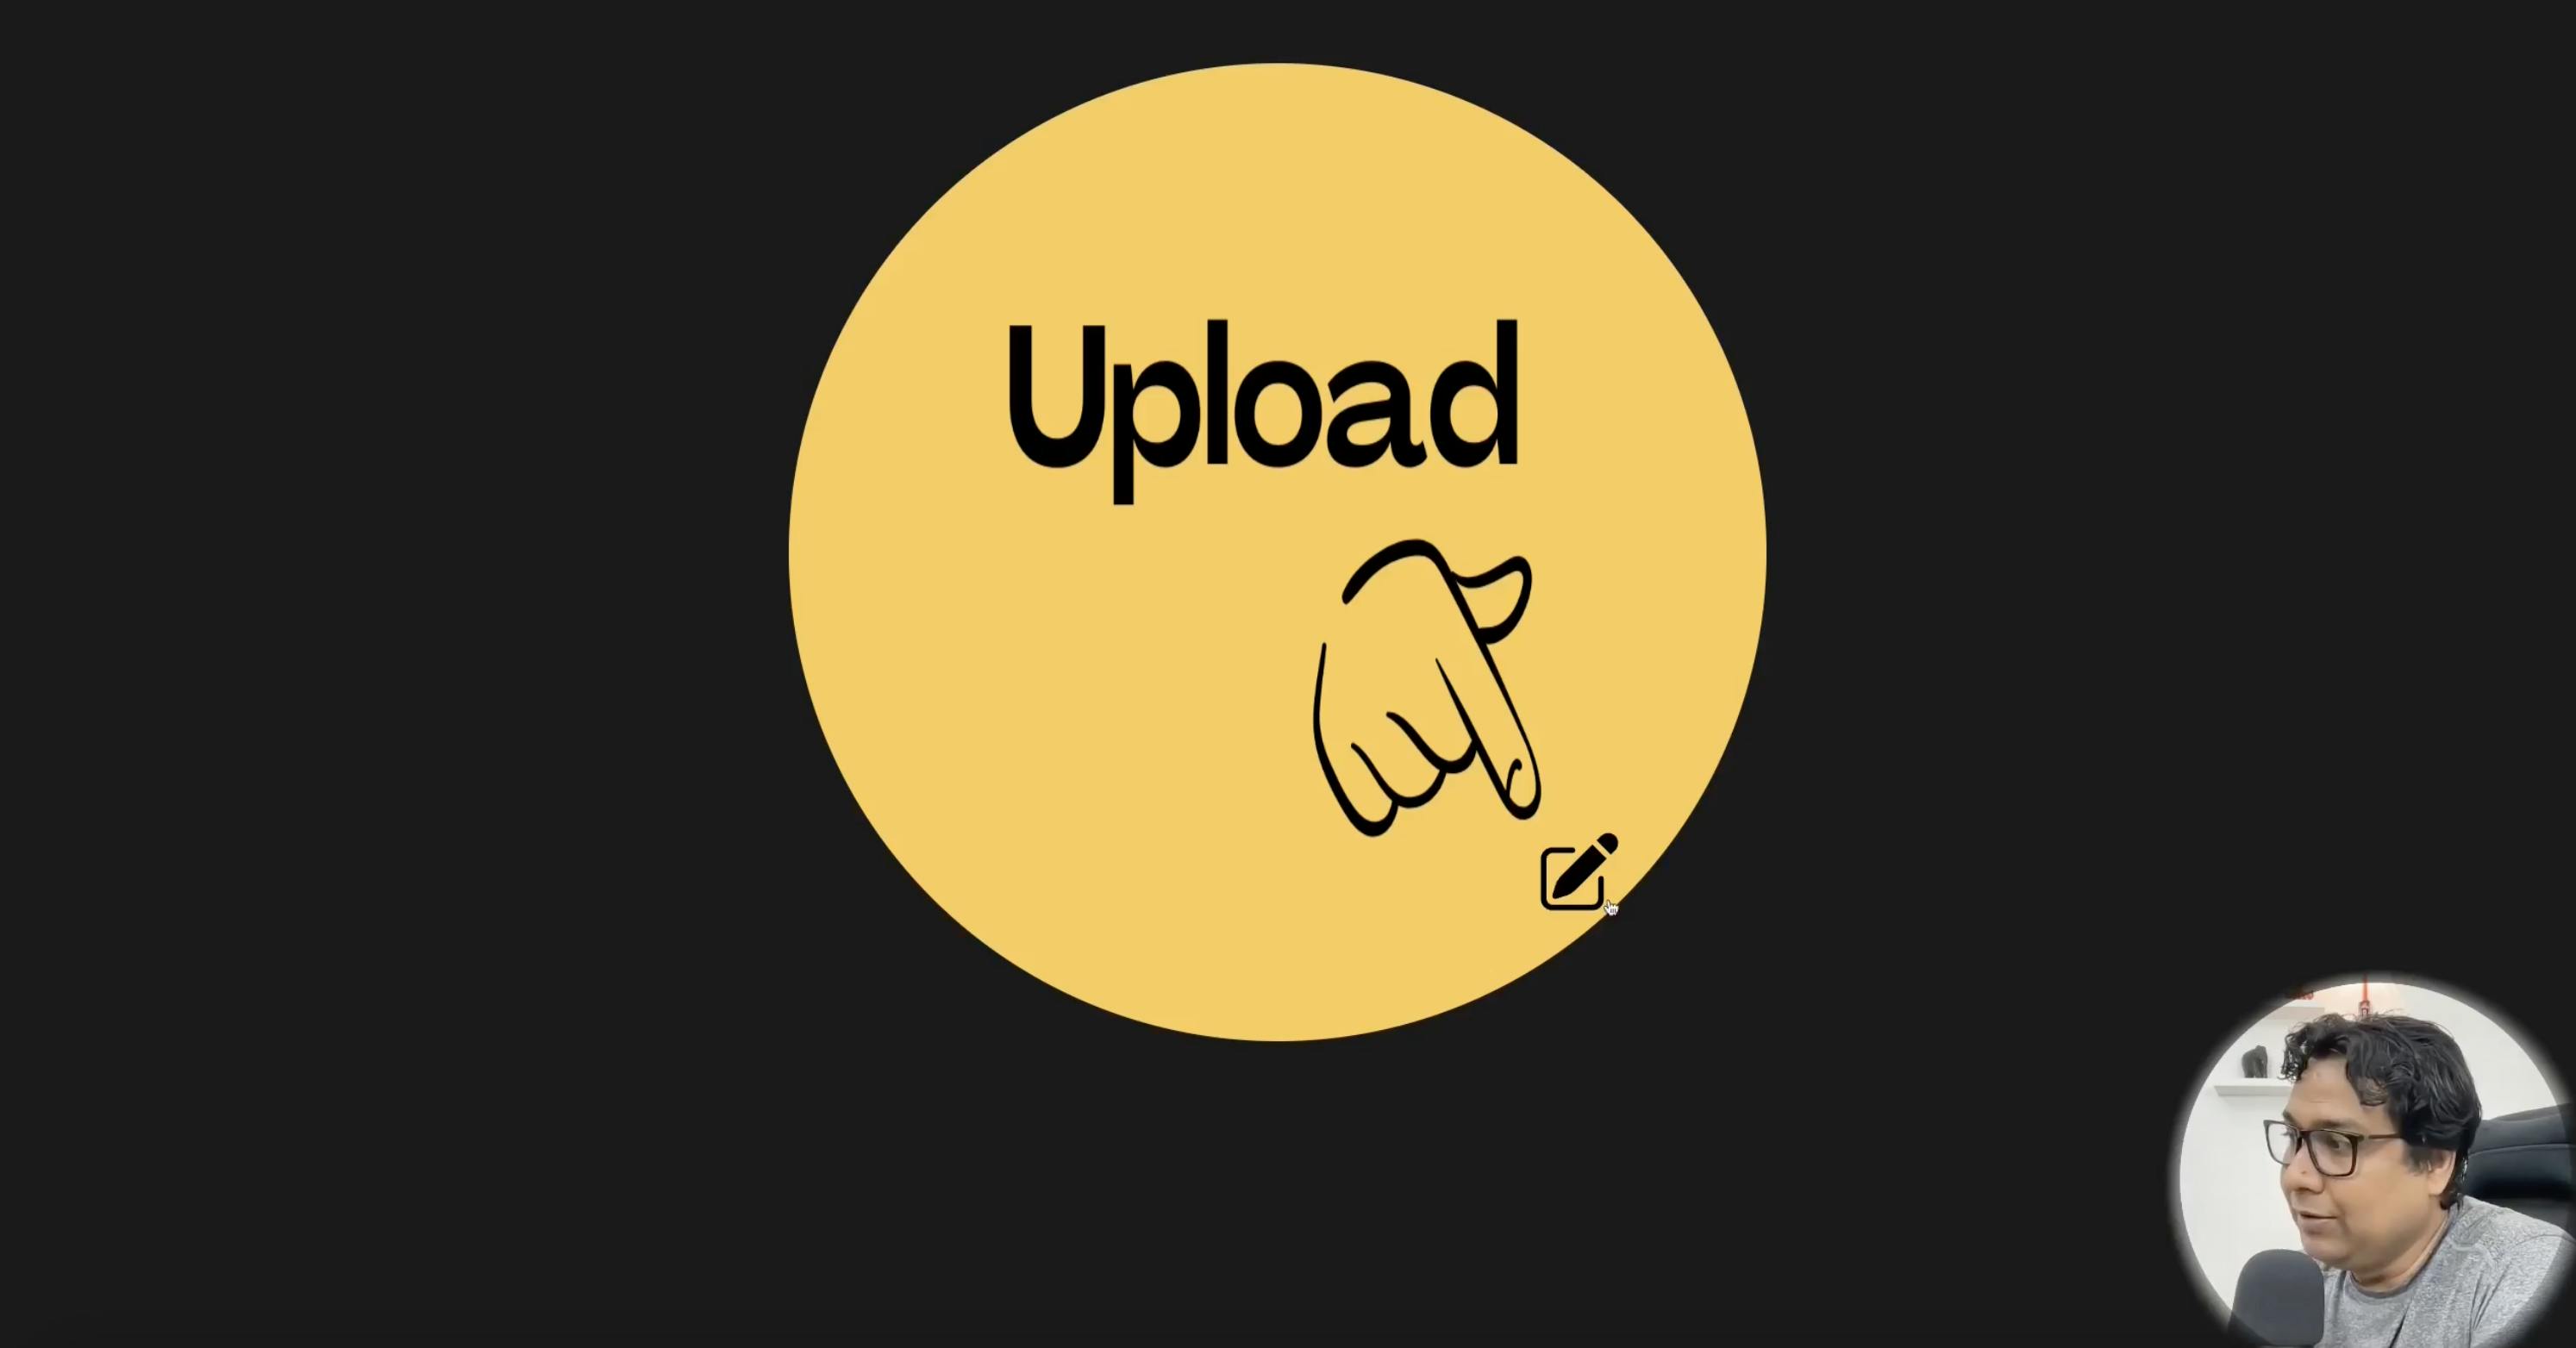 The Uploader with a placeholder image and edit icon